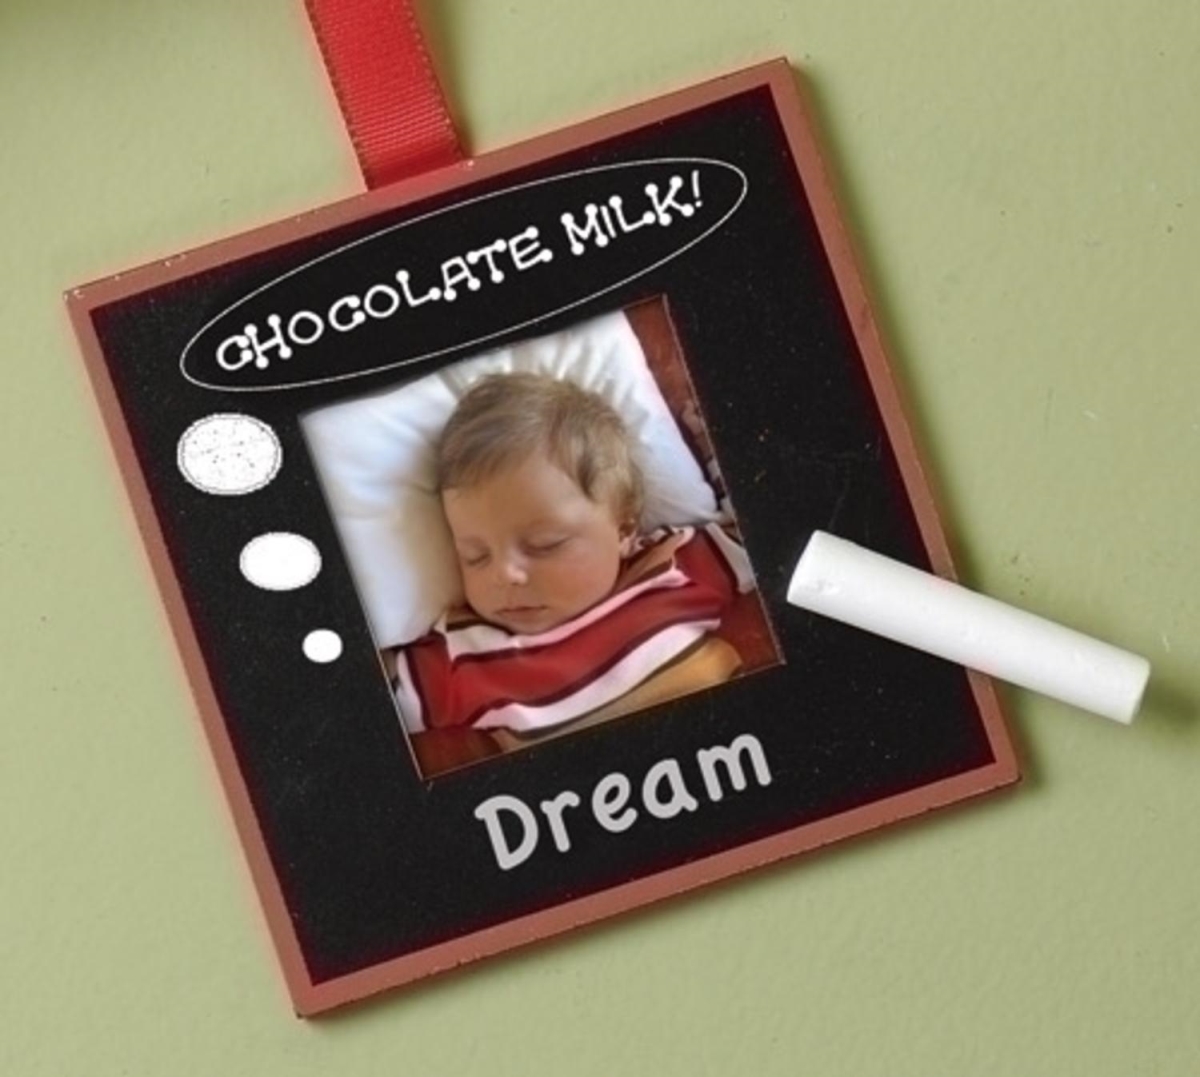 15565264 2 X 2 In. Black Chalk Board Photo Picture Frame Christmas Ornament